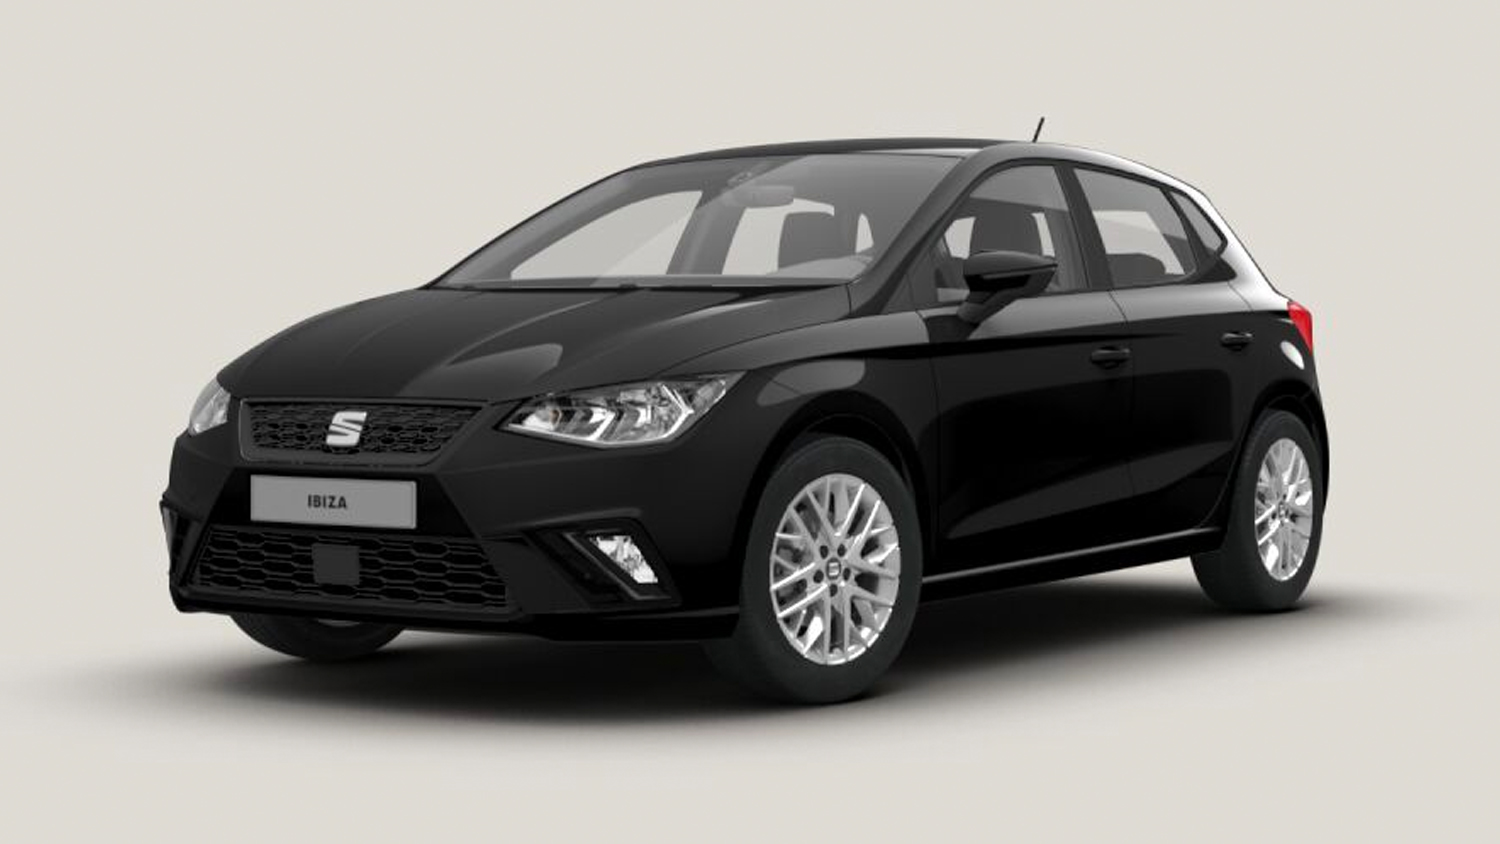 Lots to like about the SEAT Ibiza FR Sport 110ps